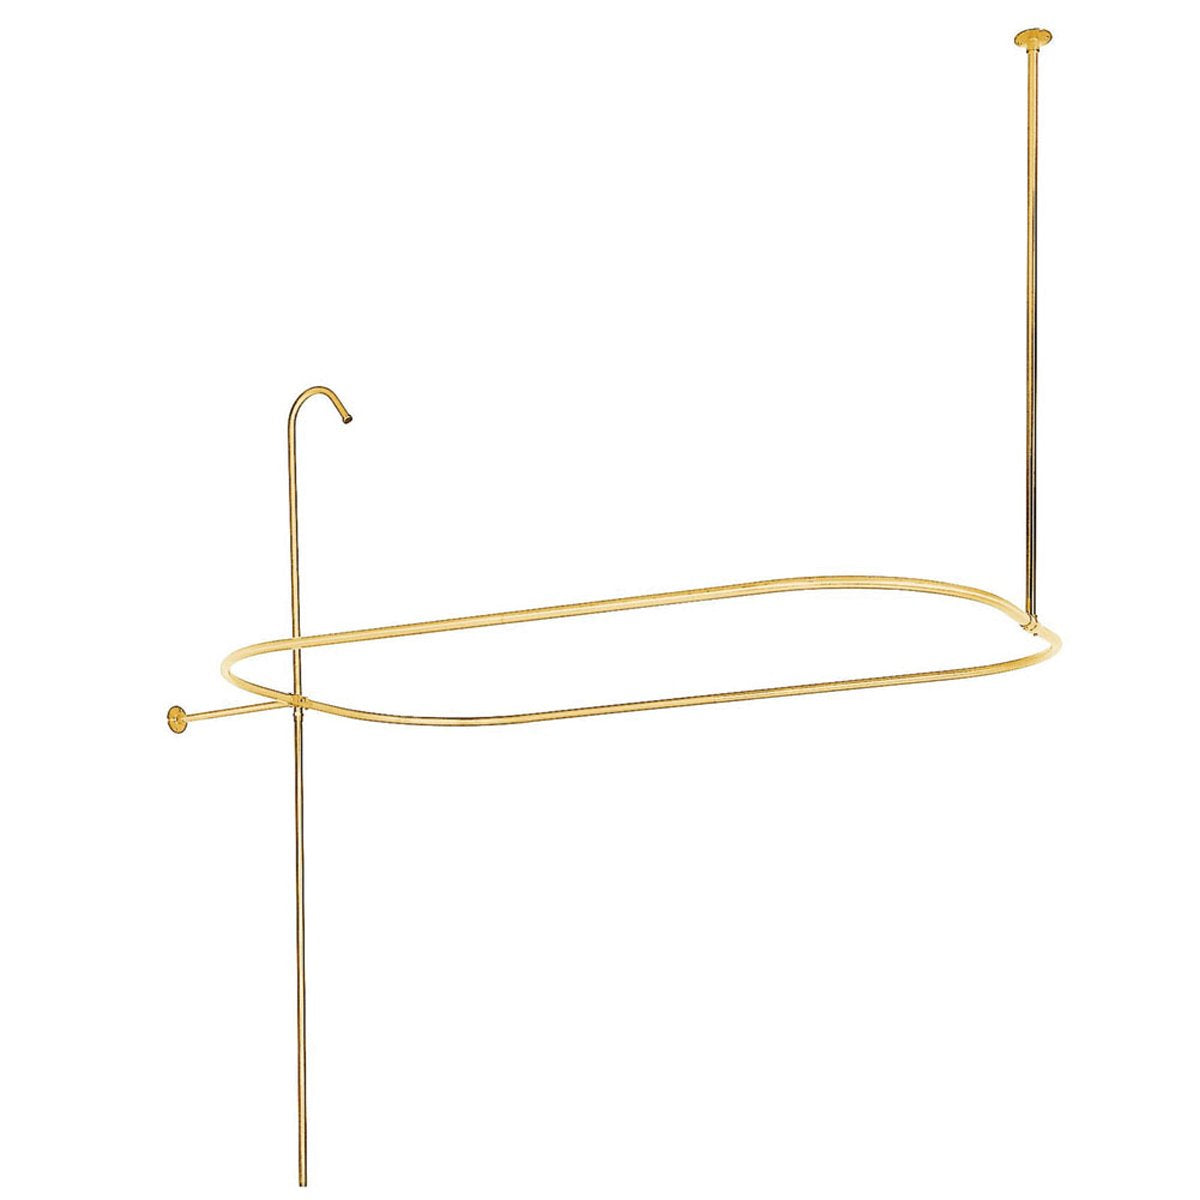 Kingston Brass Vintage Shower Ring and Riser Combination-Bathroom Accessories-Free Shipping-Directsinks.